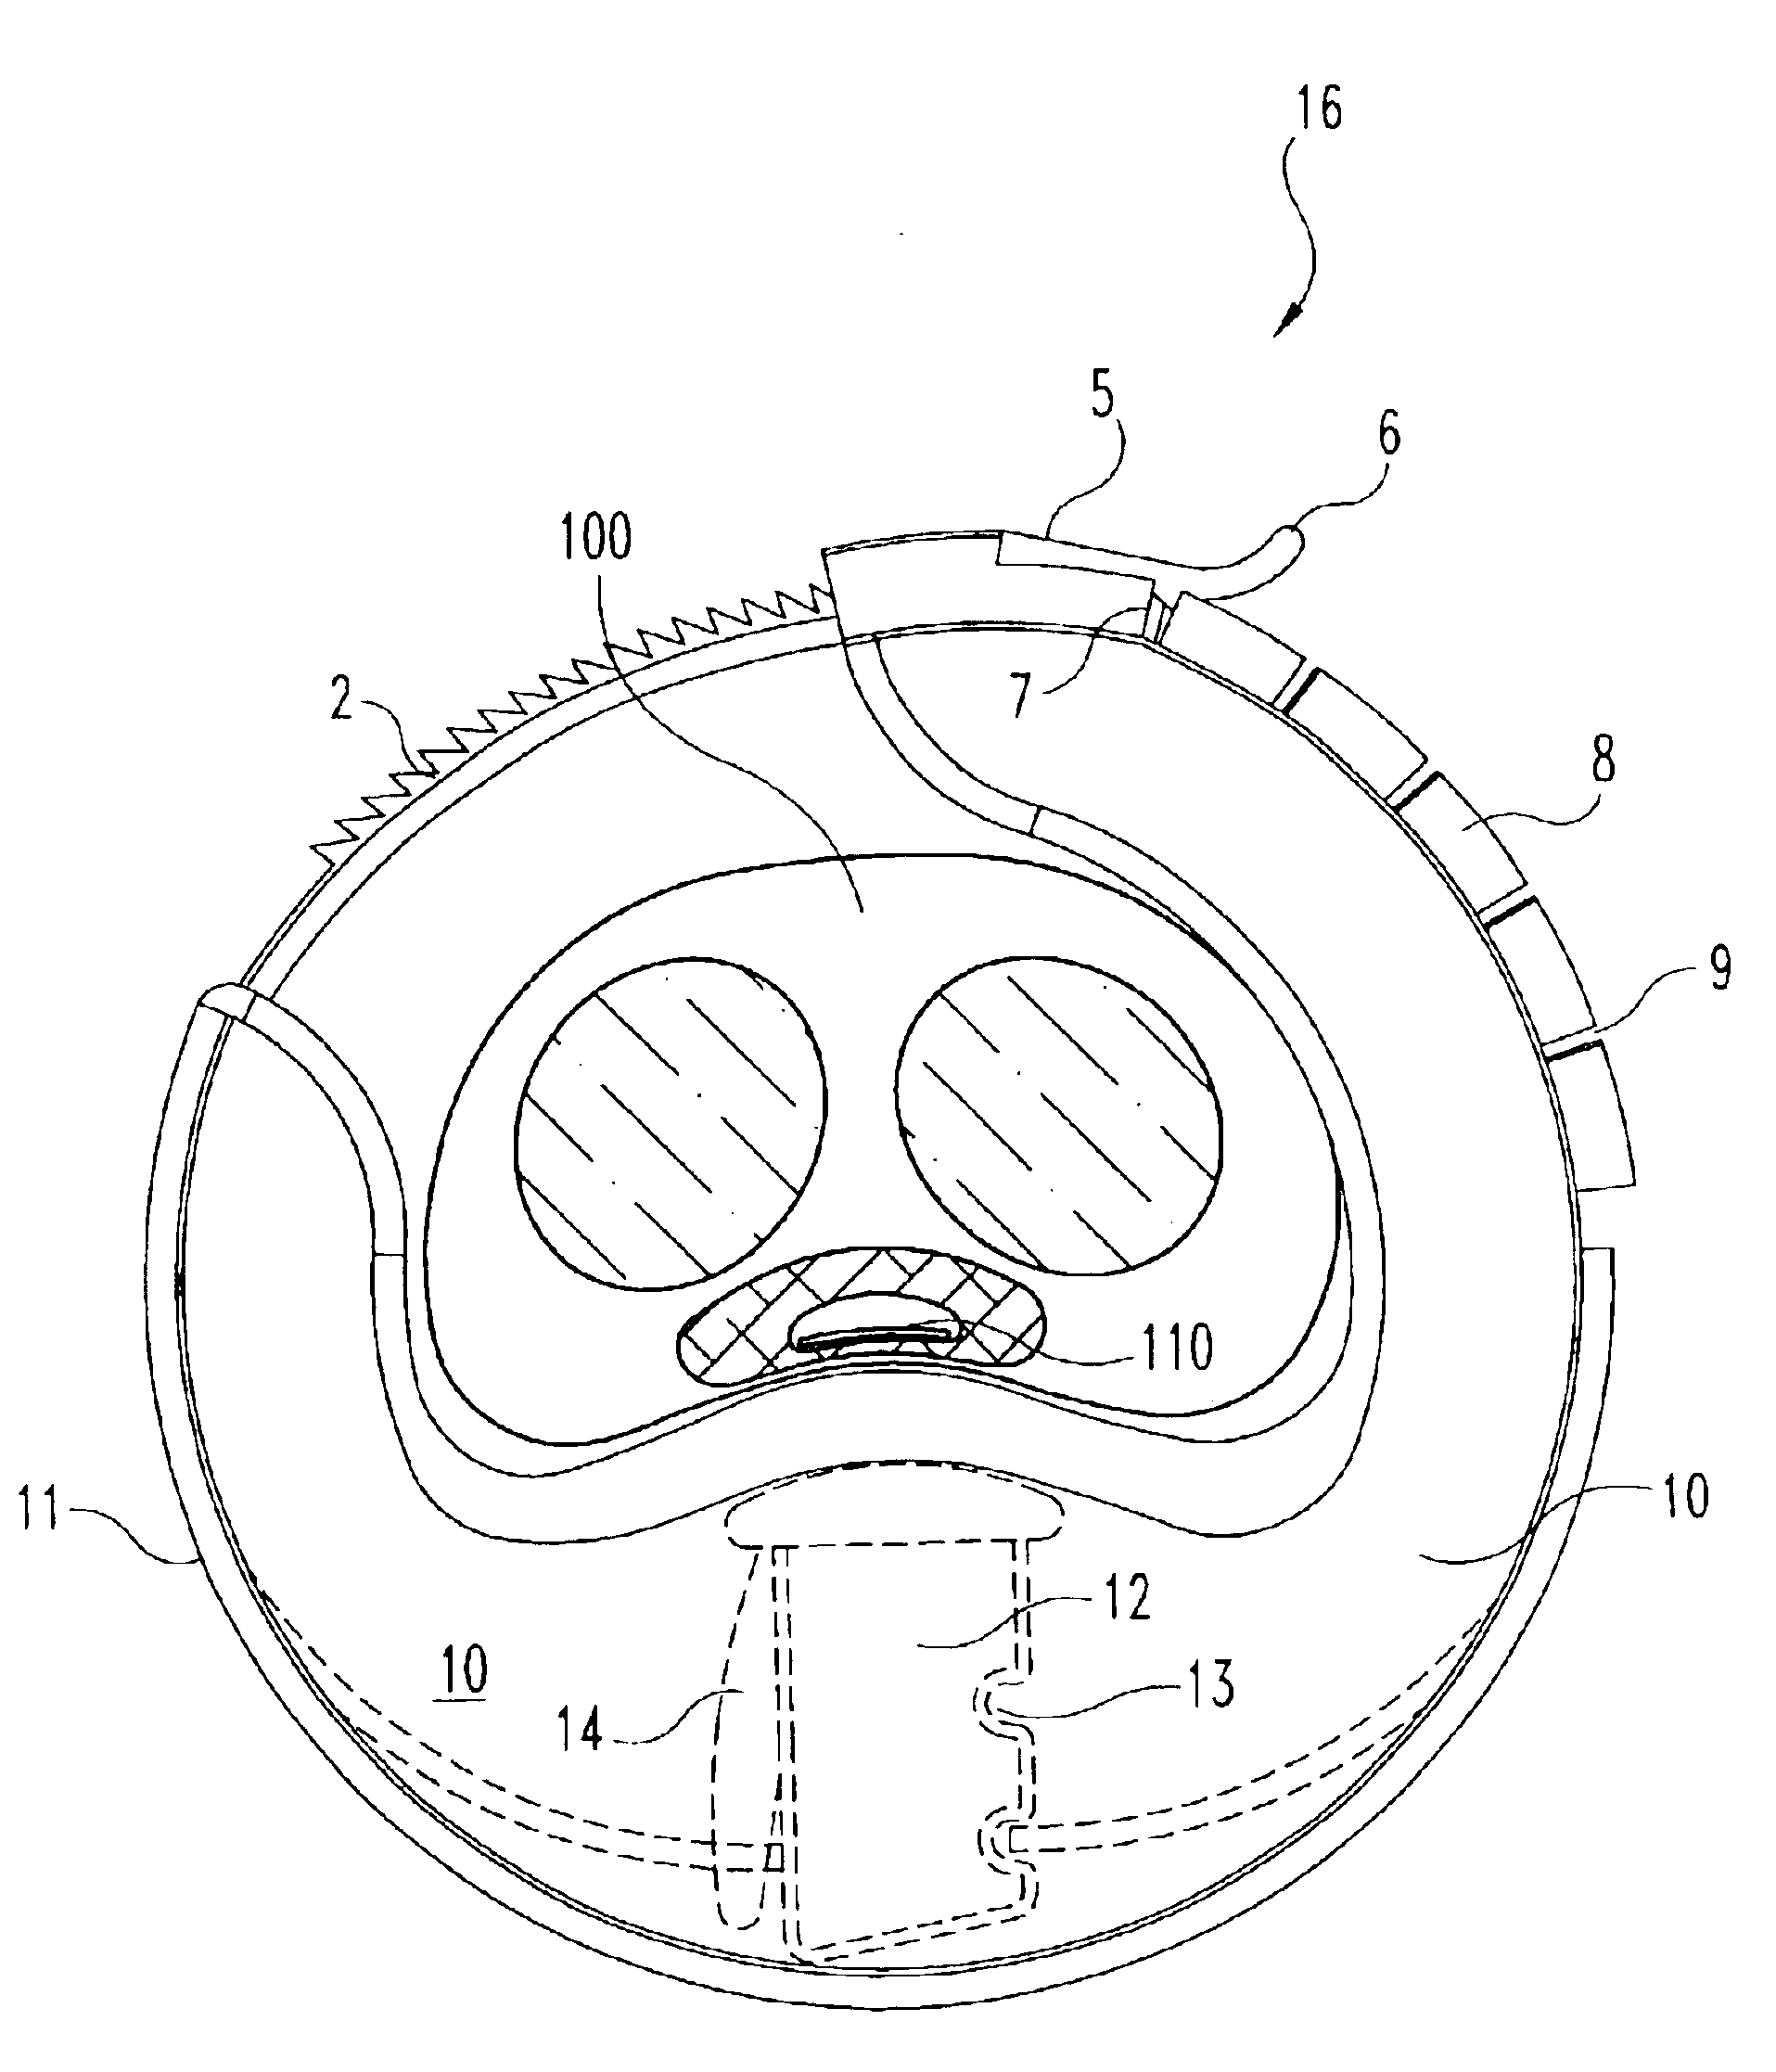 External incontinence device